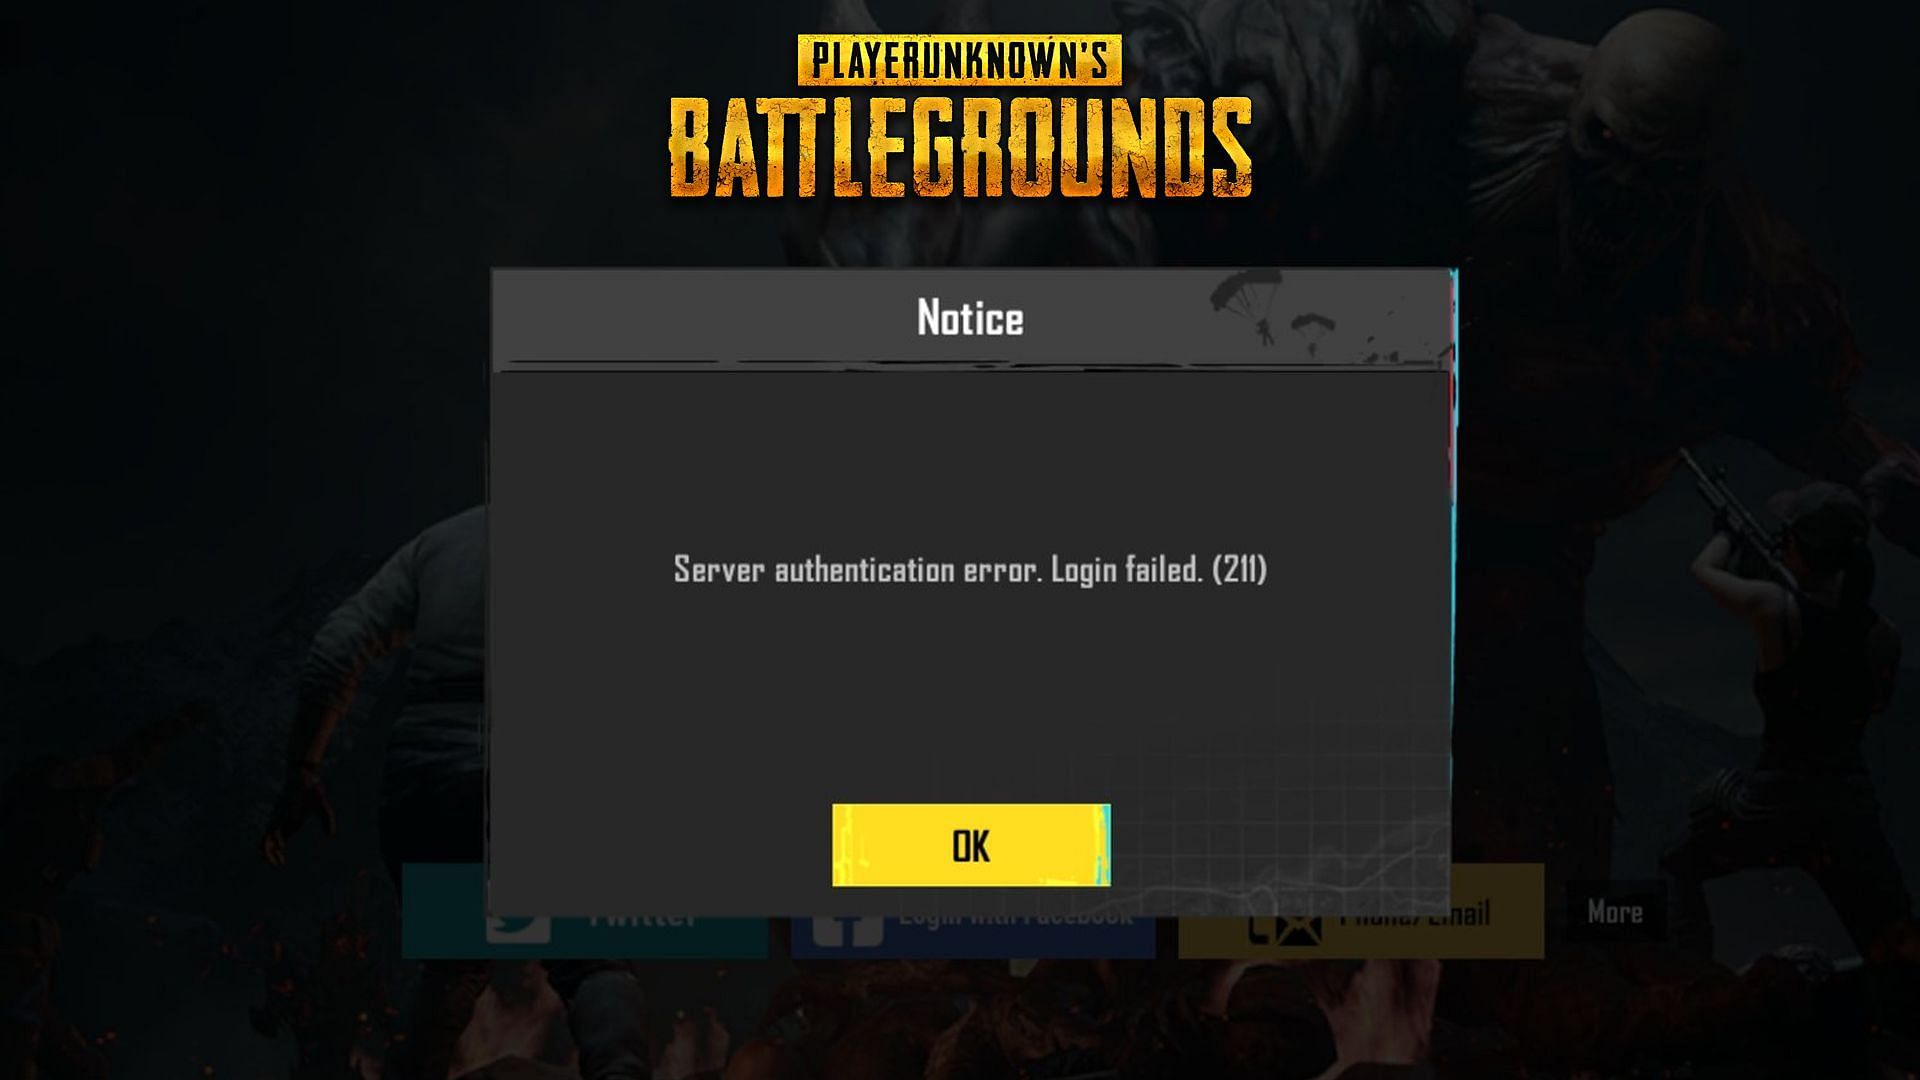 Fix Call Of Duty Mobile Log In Issue Due To Authorization Error